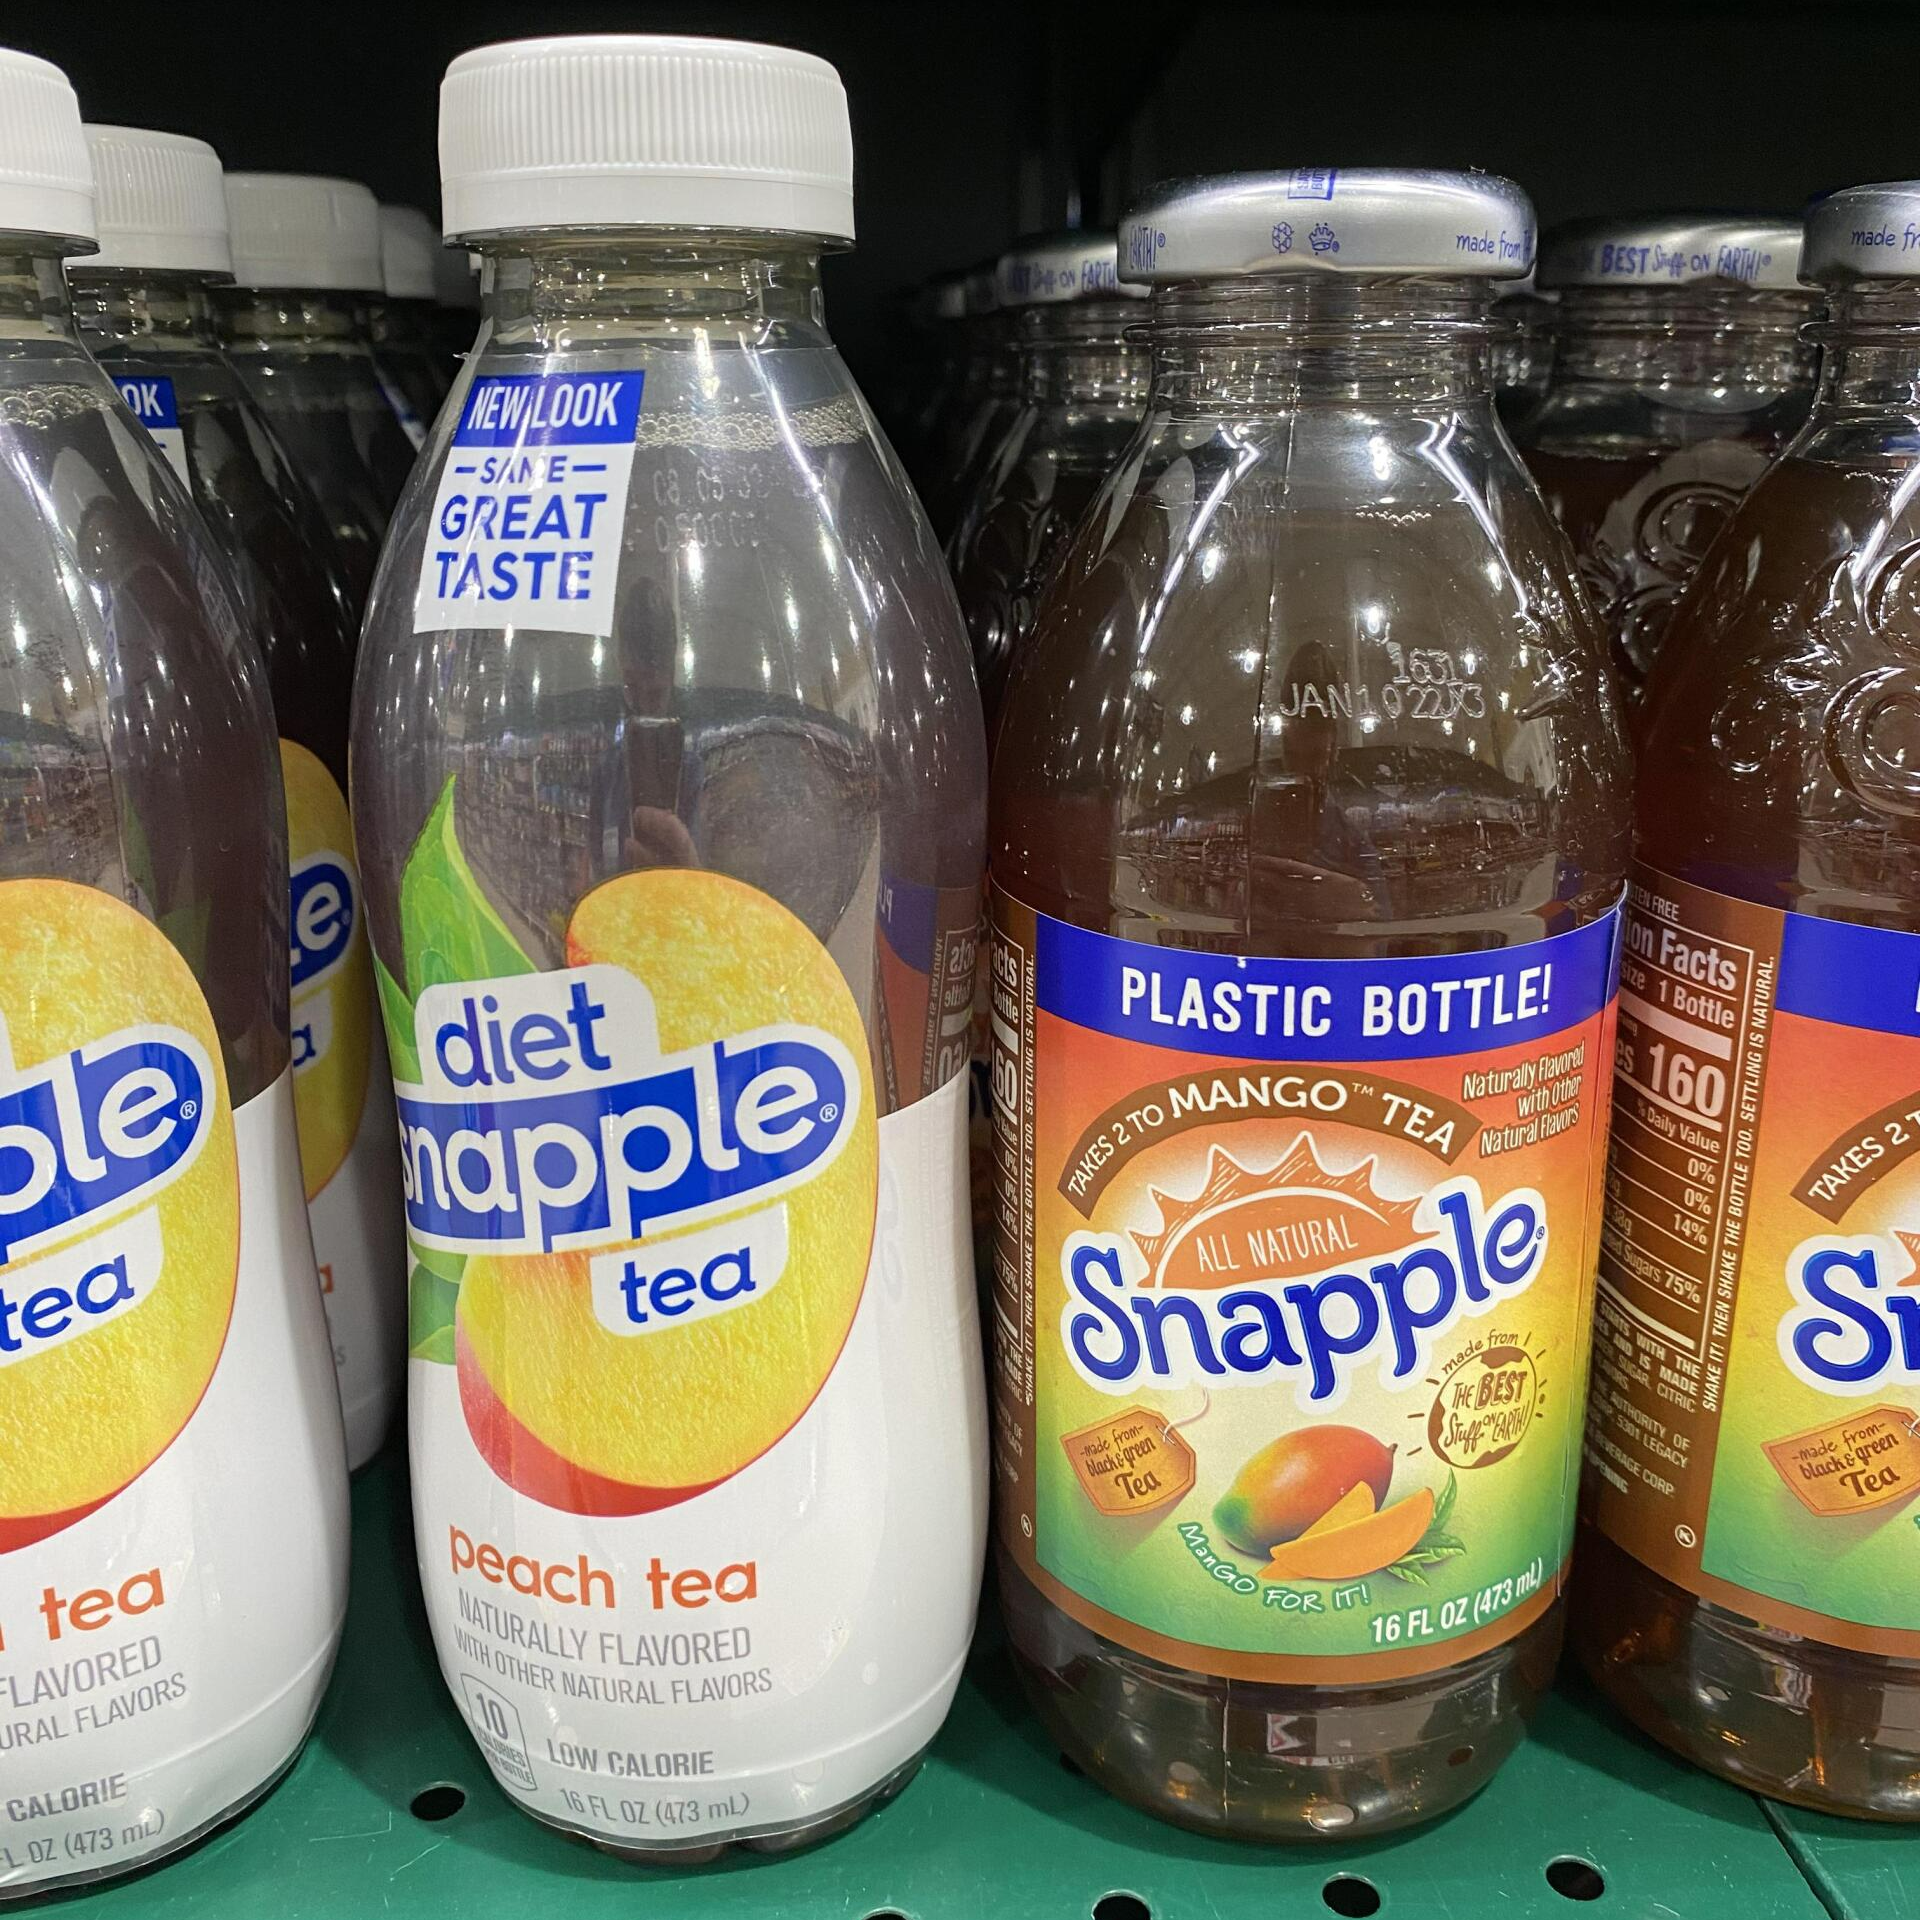 Snapple's 100% recyclable plastic bottle next to the old style Snapple bottle  with metal cap.